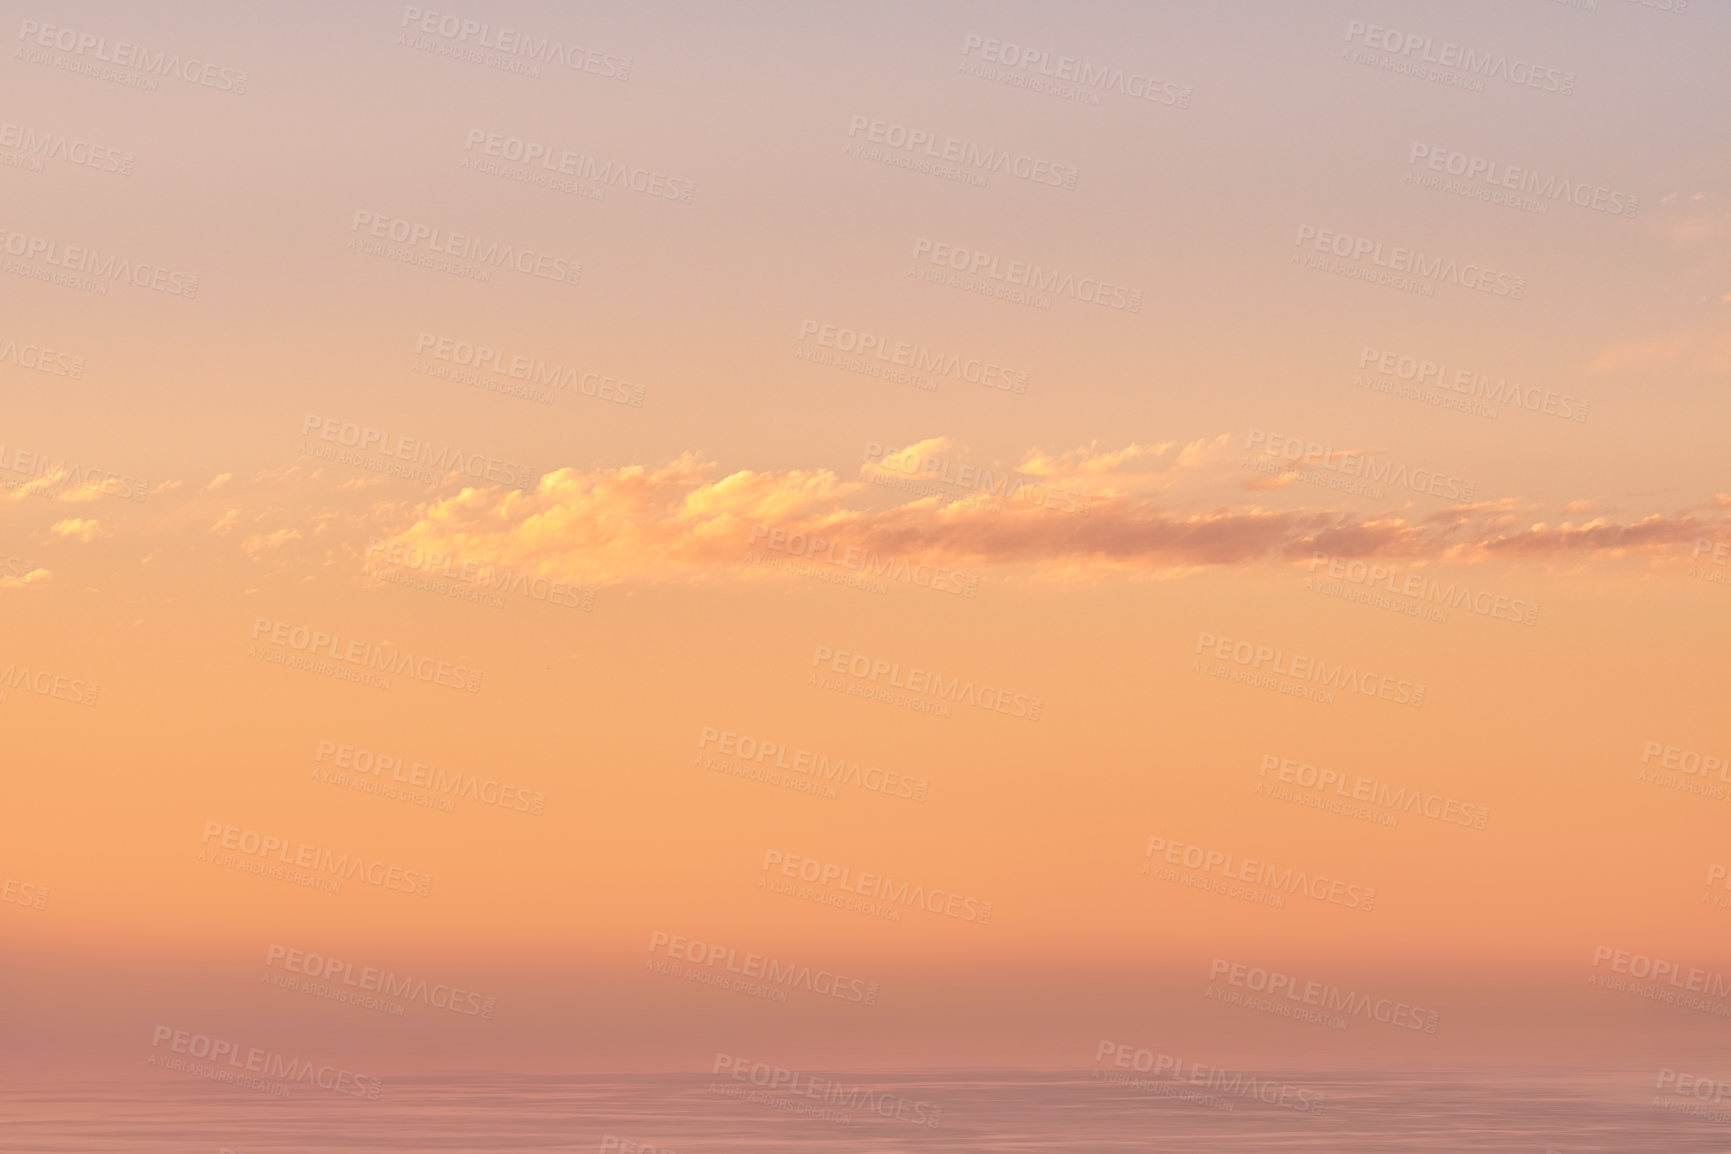 Buy stock photo Seascape copy space with clouds in an orange sunset sky with a copyspace background. Calm, serene, tranquil, peaceful and zen ocean and sea view at dusk. Beautiful scenic mother nature in the evening